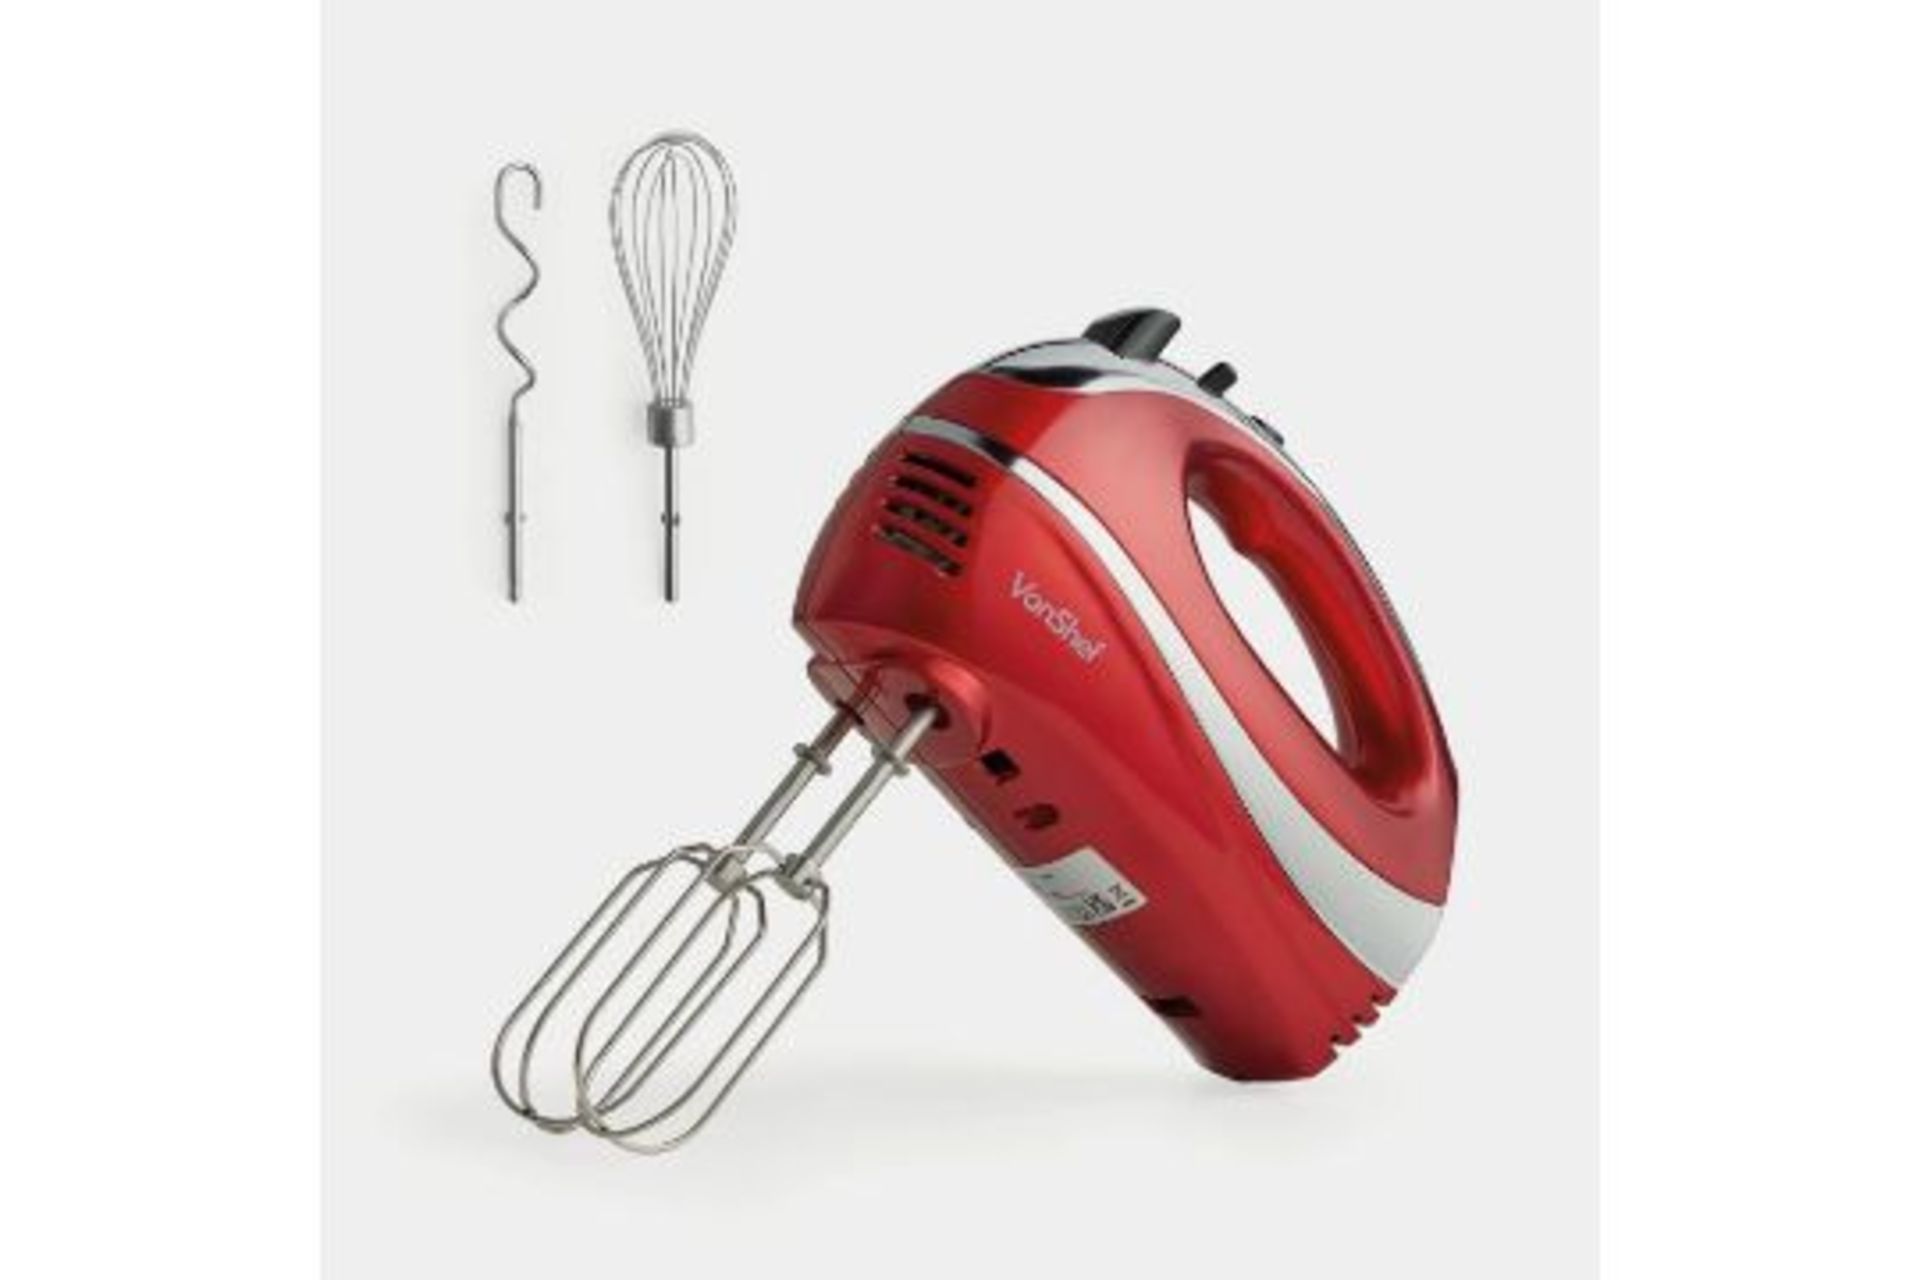 300W Red Hand Mixer. - PW. This is the ultimate kitchen appliance if you love baking and cooking.